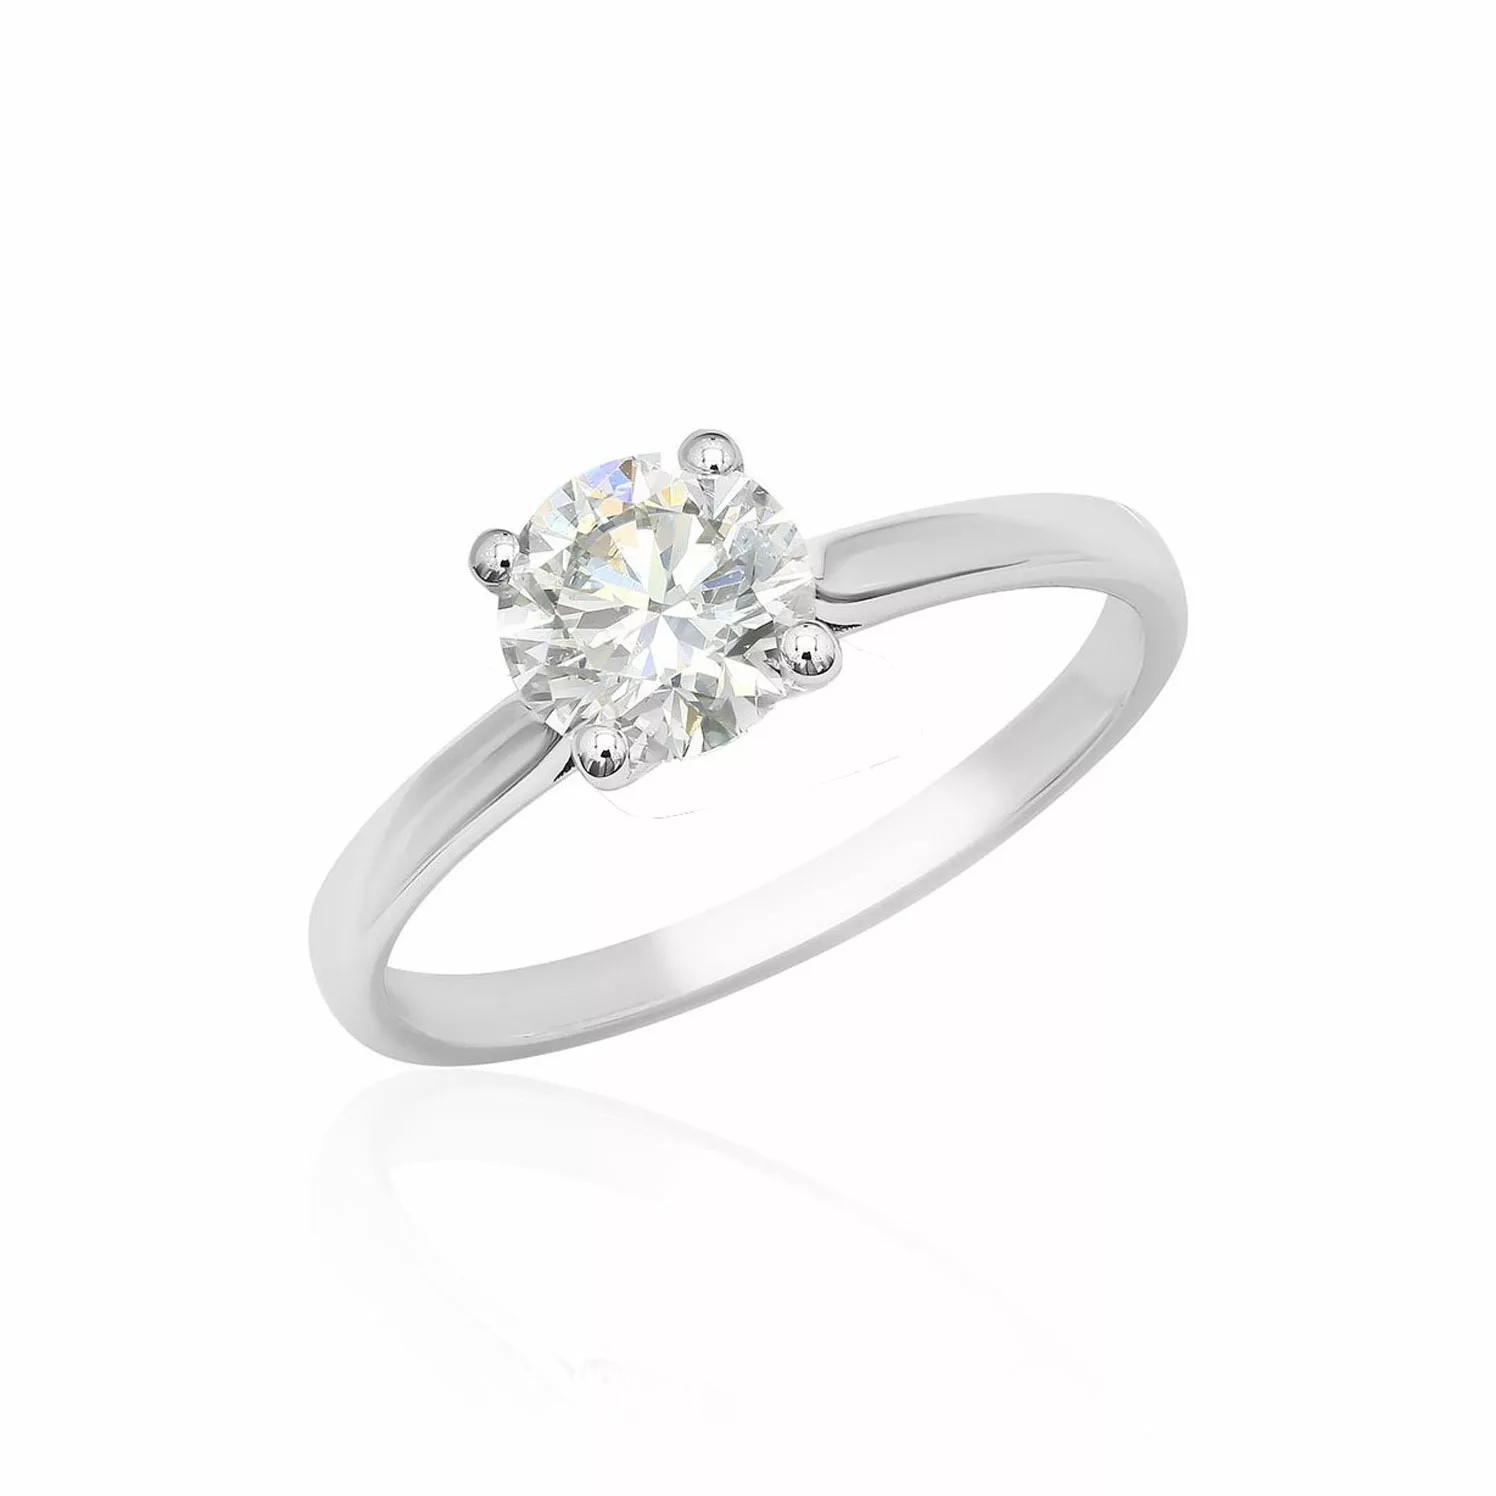 Buy 1920's Art Deco Diamond Engagement Ring 1.43 ctw in Platinum GIA  Certified Online | Arnold Jewelers